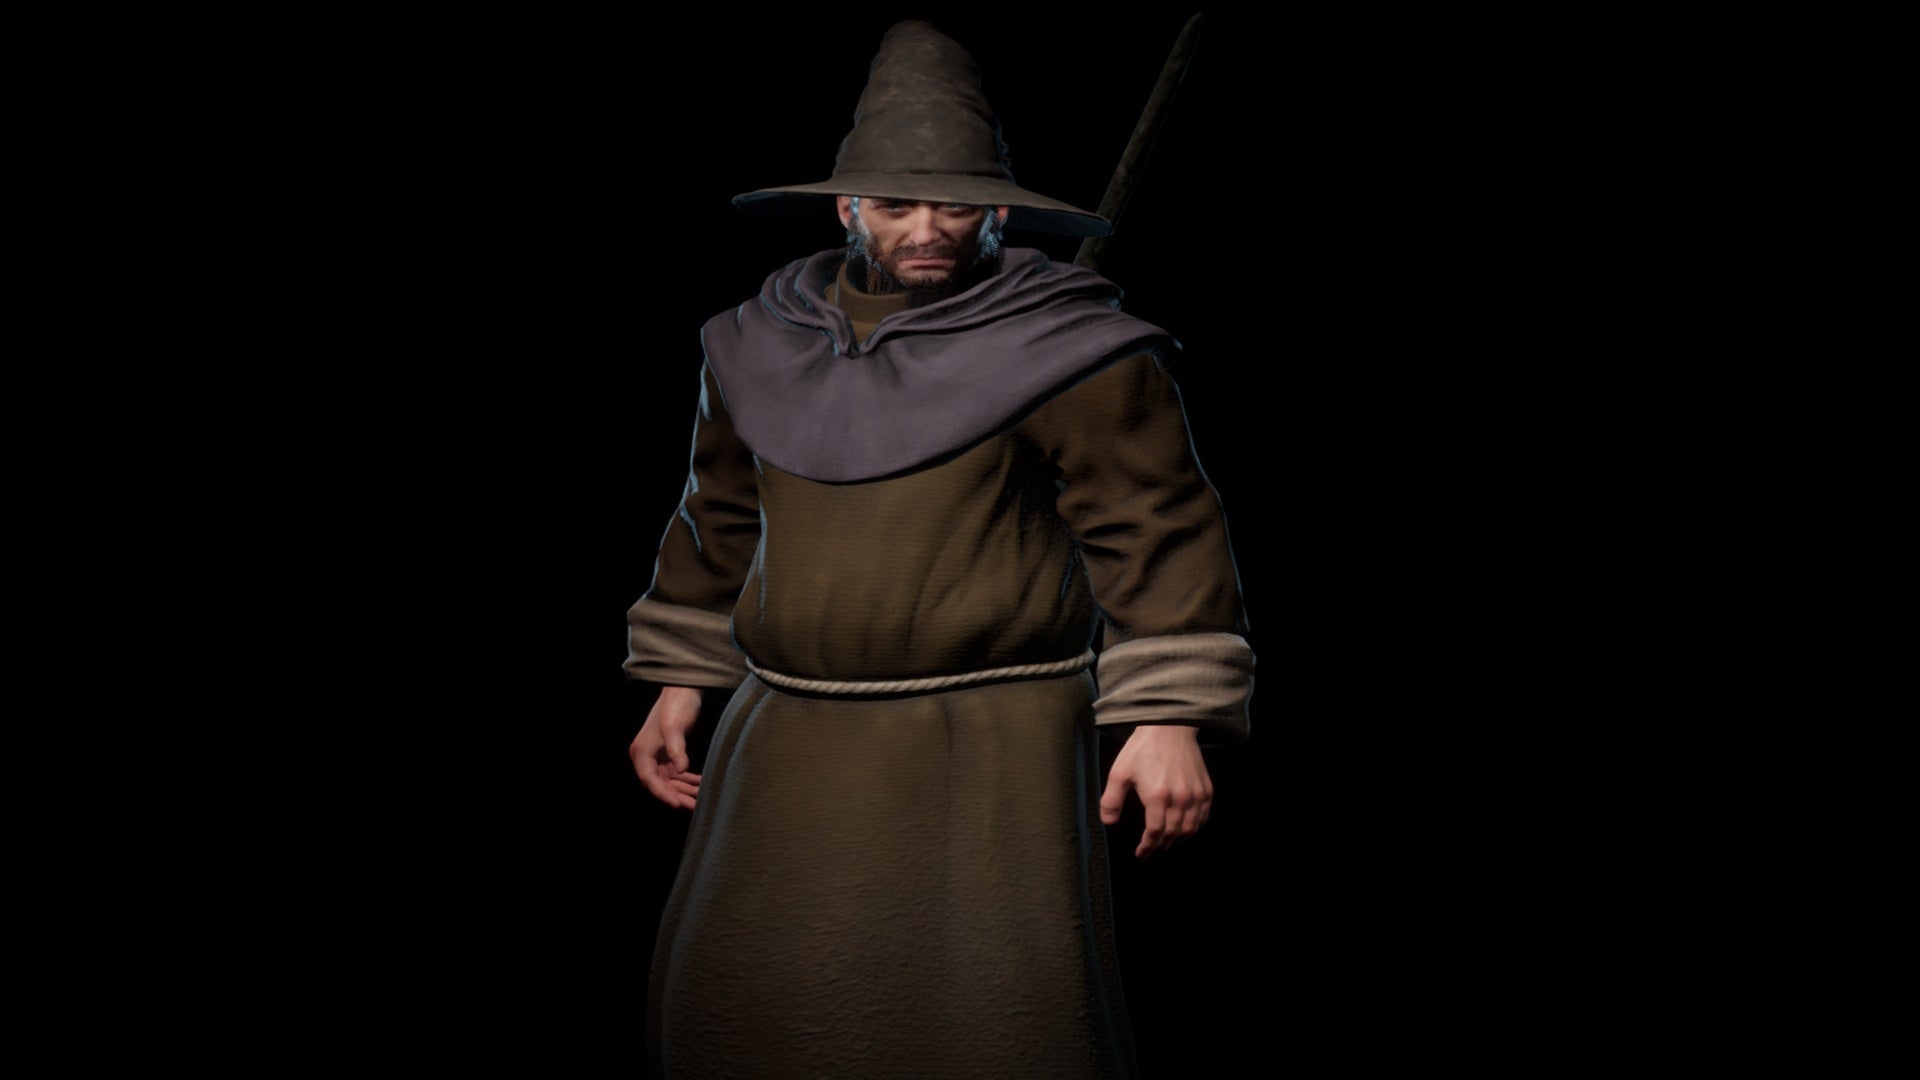 How to cast spells in Dark and Darker: An animated man with a gray beard, wearing a grey pointy hat and a plain brown robe, is standing alone in the midst of inky blackness